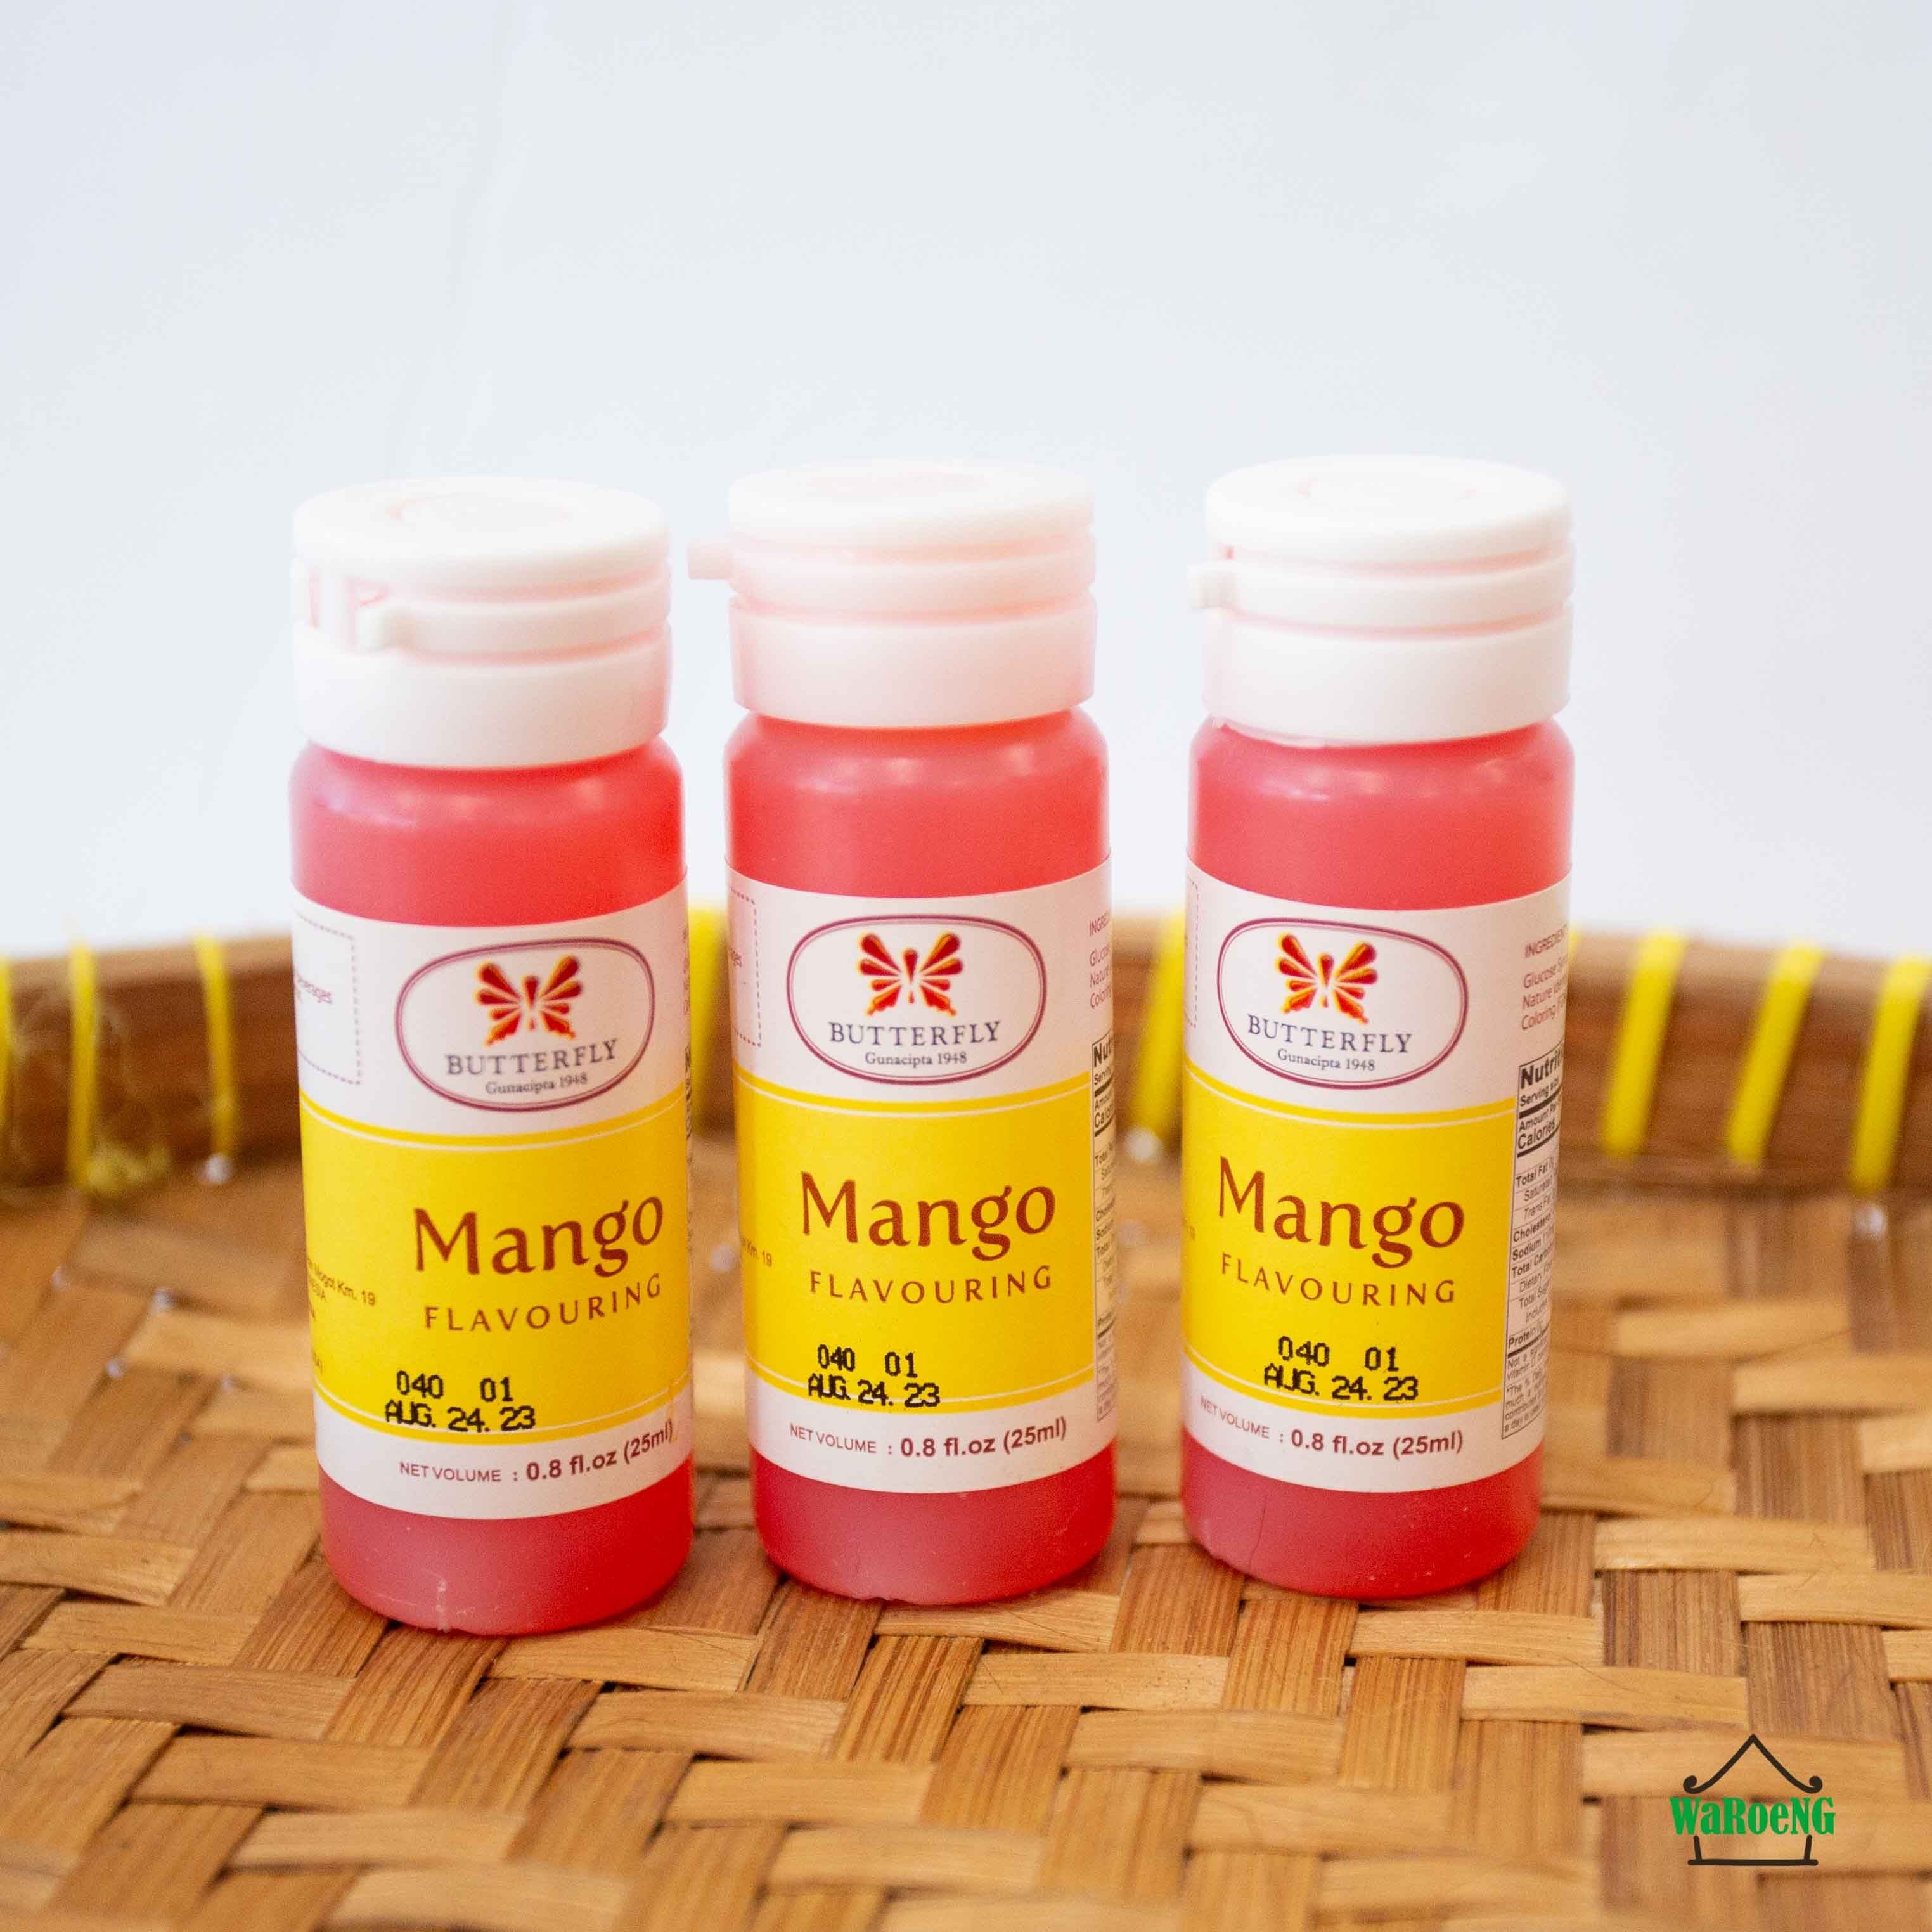 Butterfly Mango Flavouring